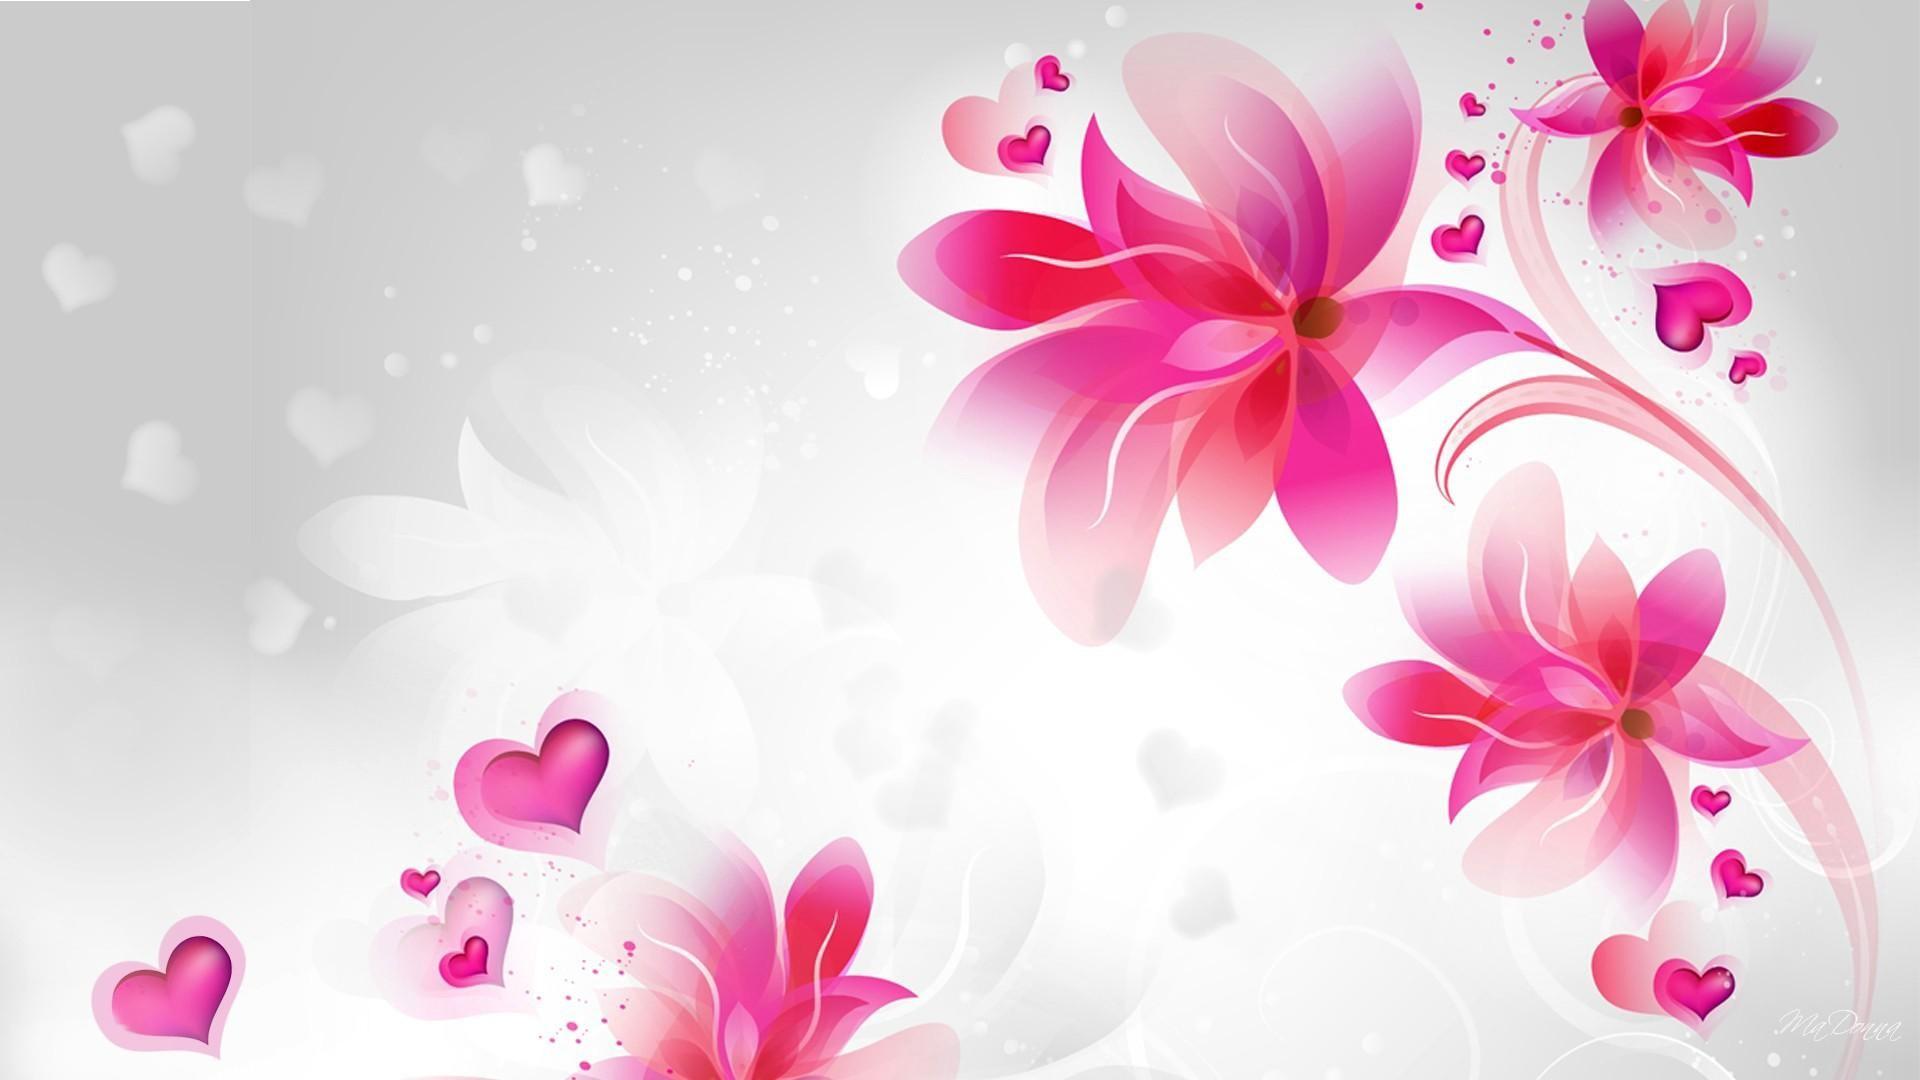 Abstract Flowers Wallpapers - Top Free Abstract Flowers Backgrounds